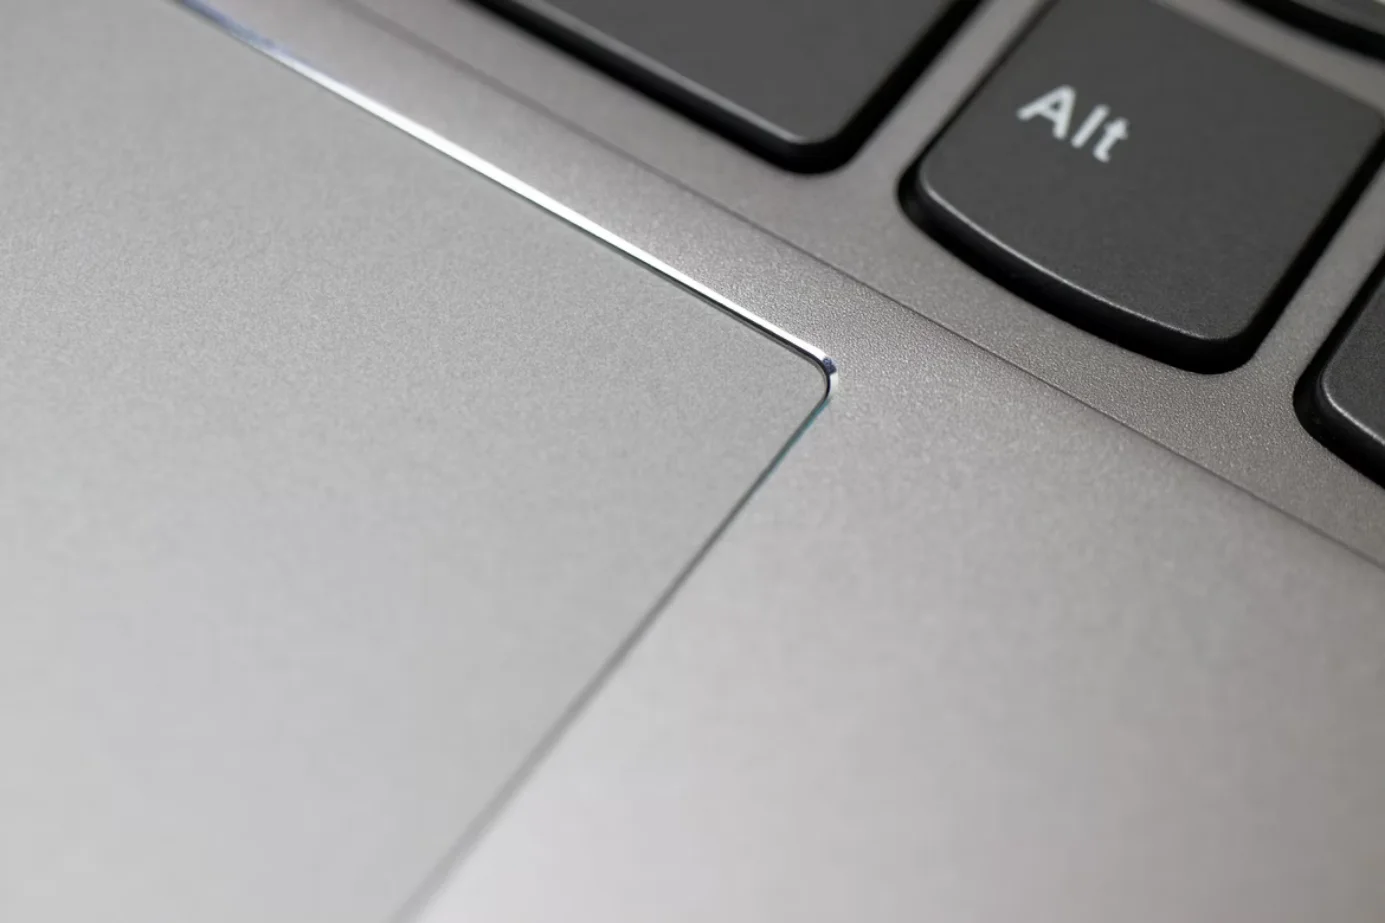 How to fix touchpad scrolling isn't working on Windows 10